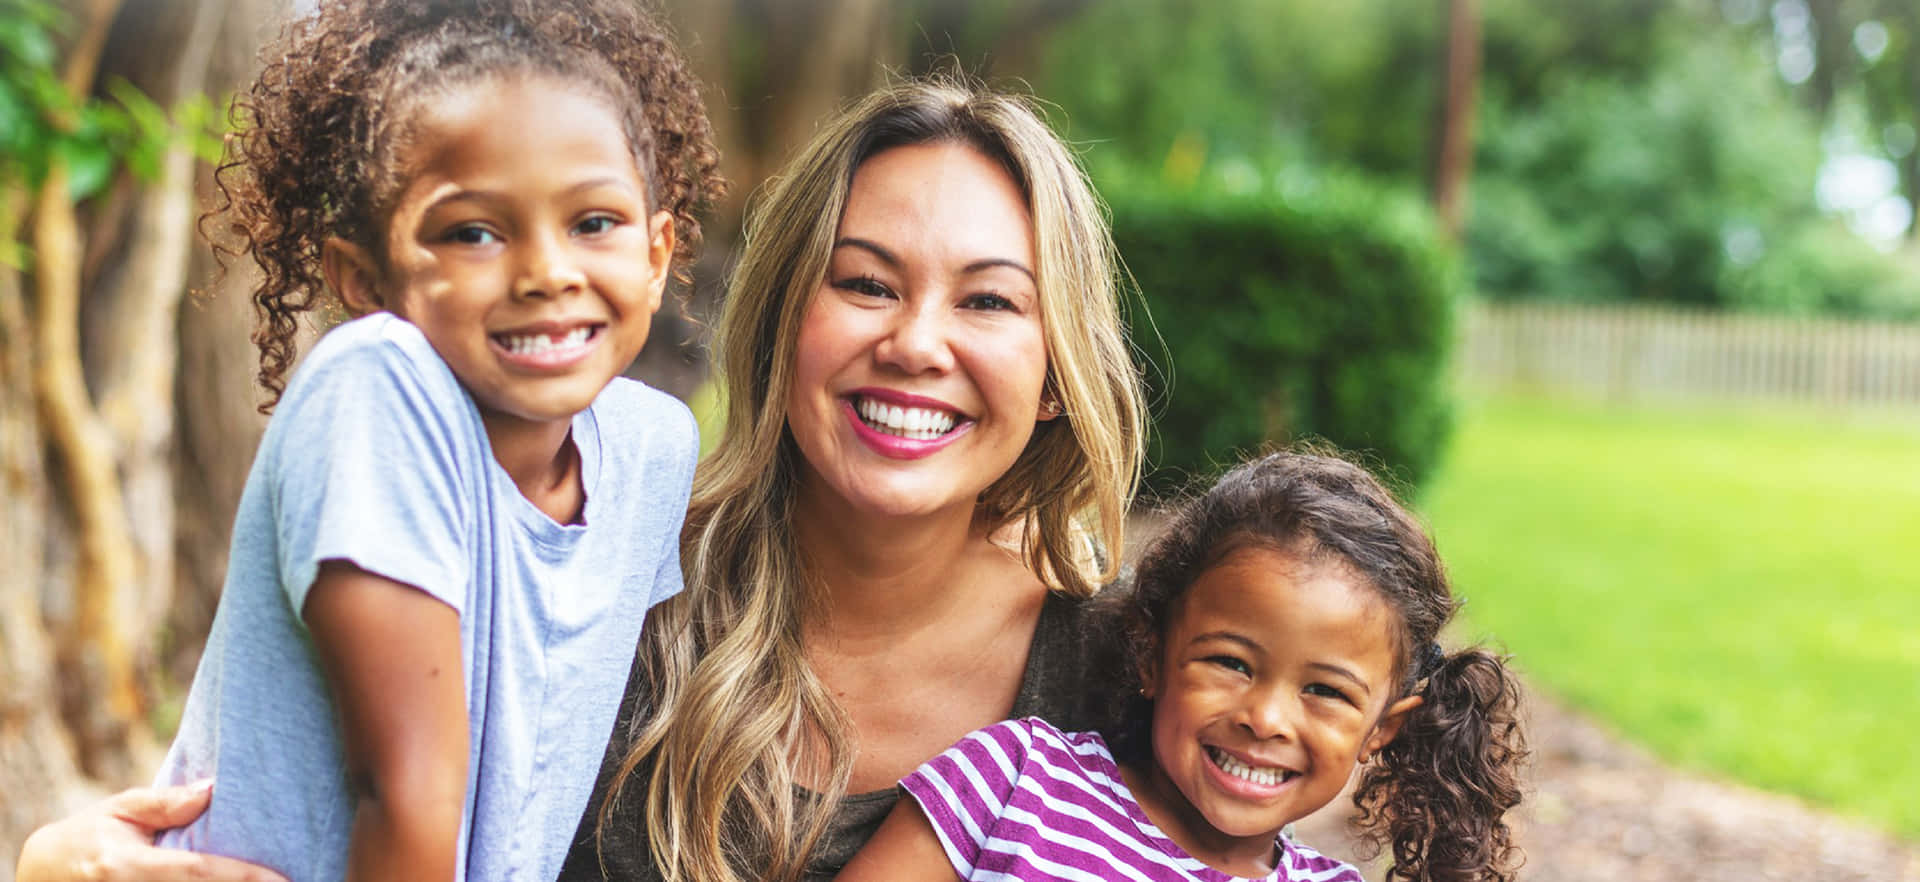 A Woman And Her Two Young Daughters Are Smiling